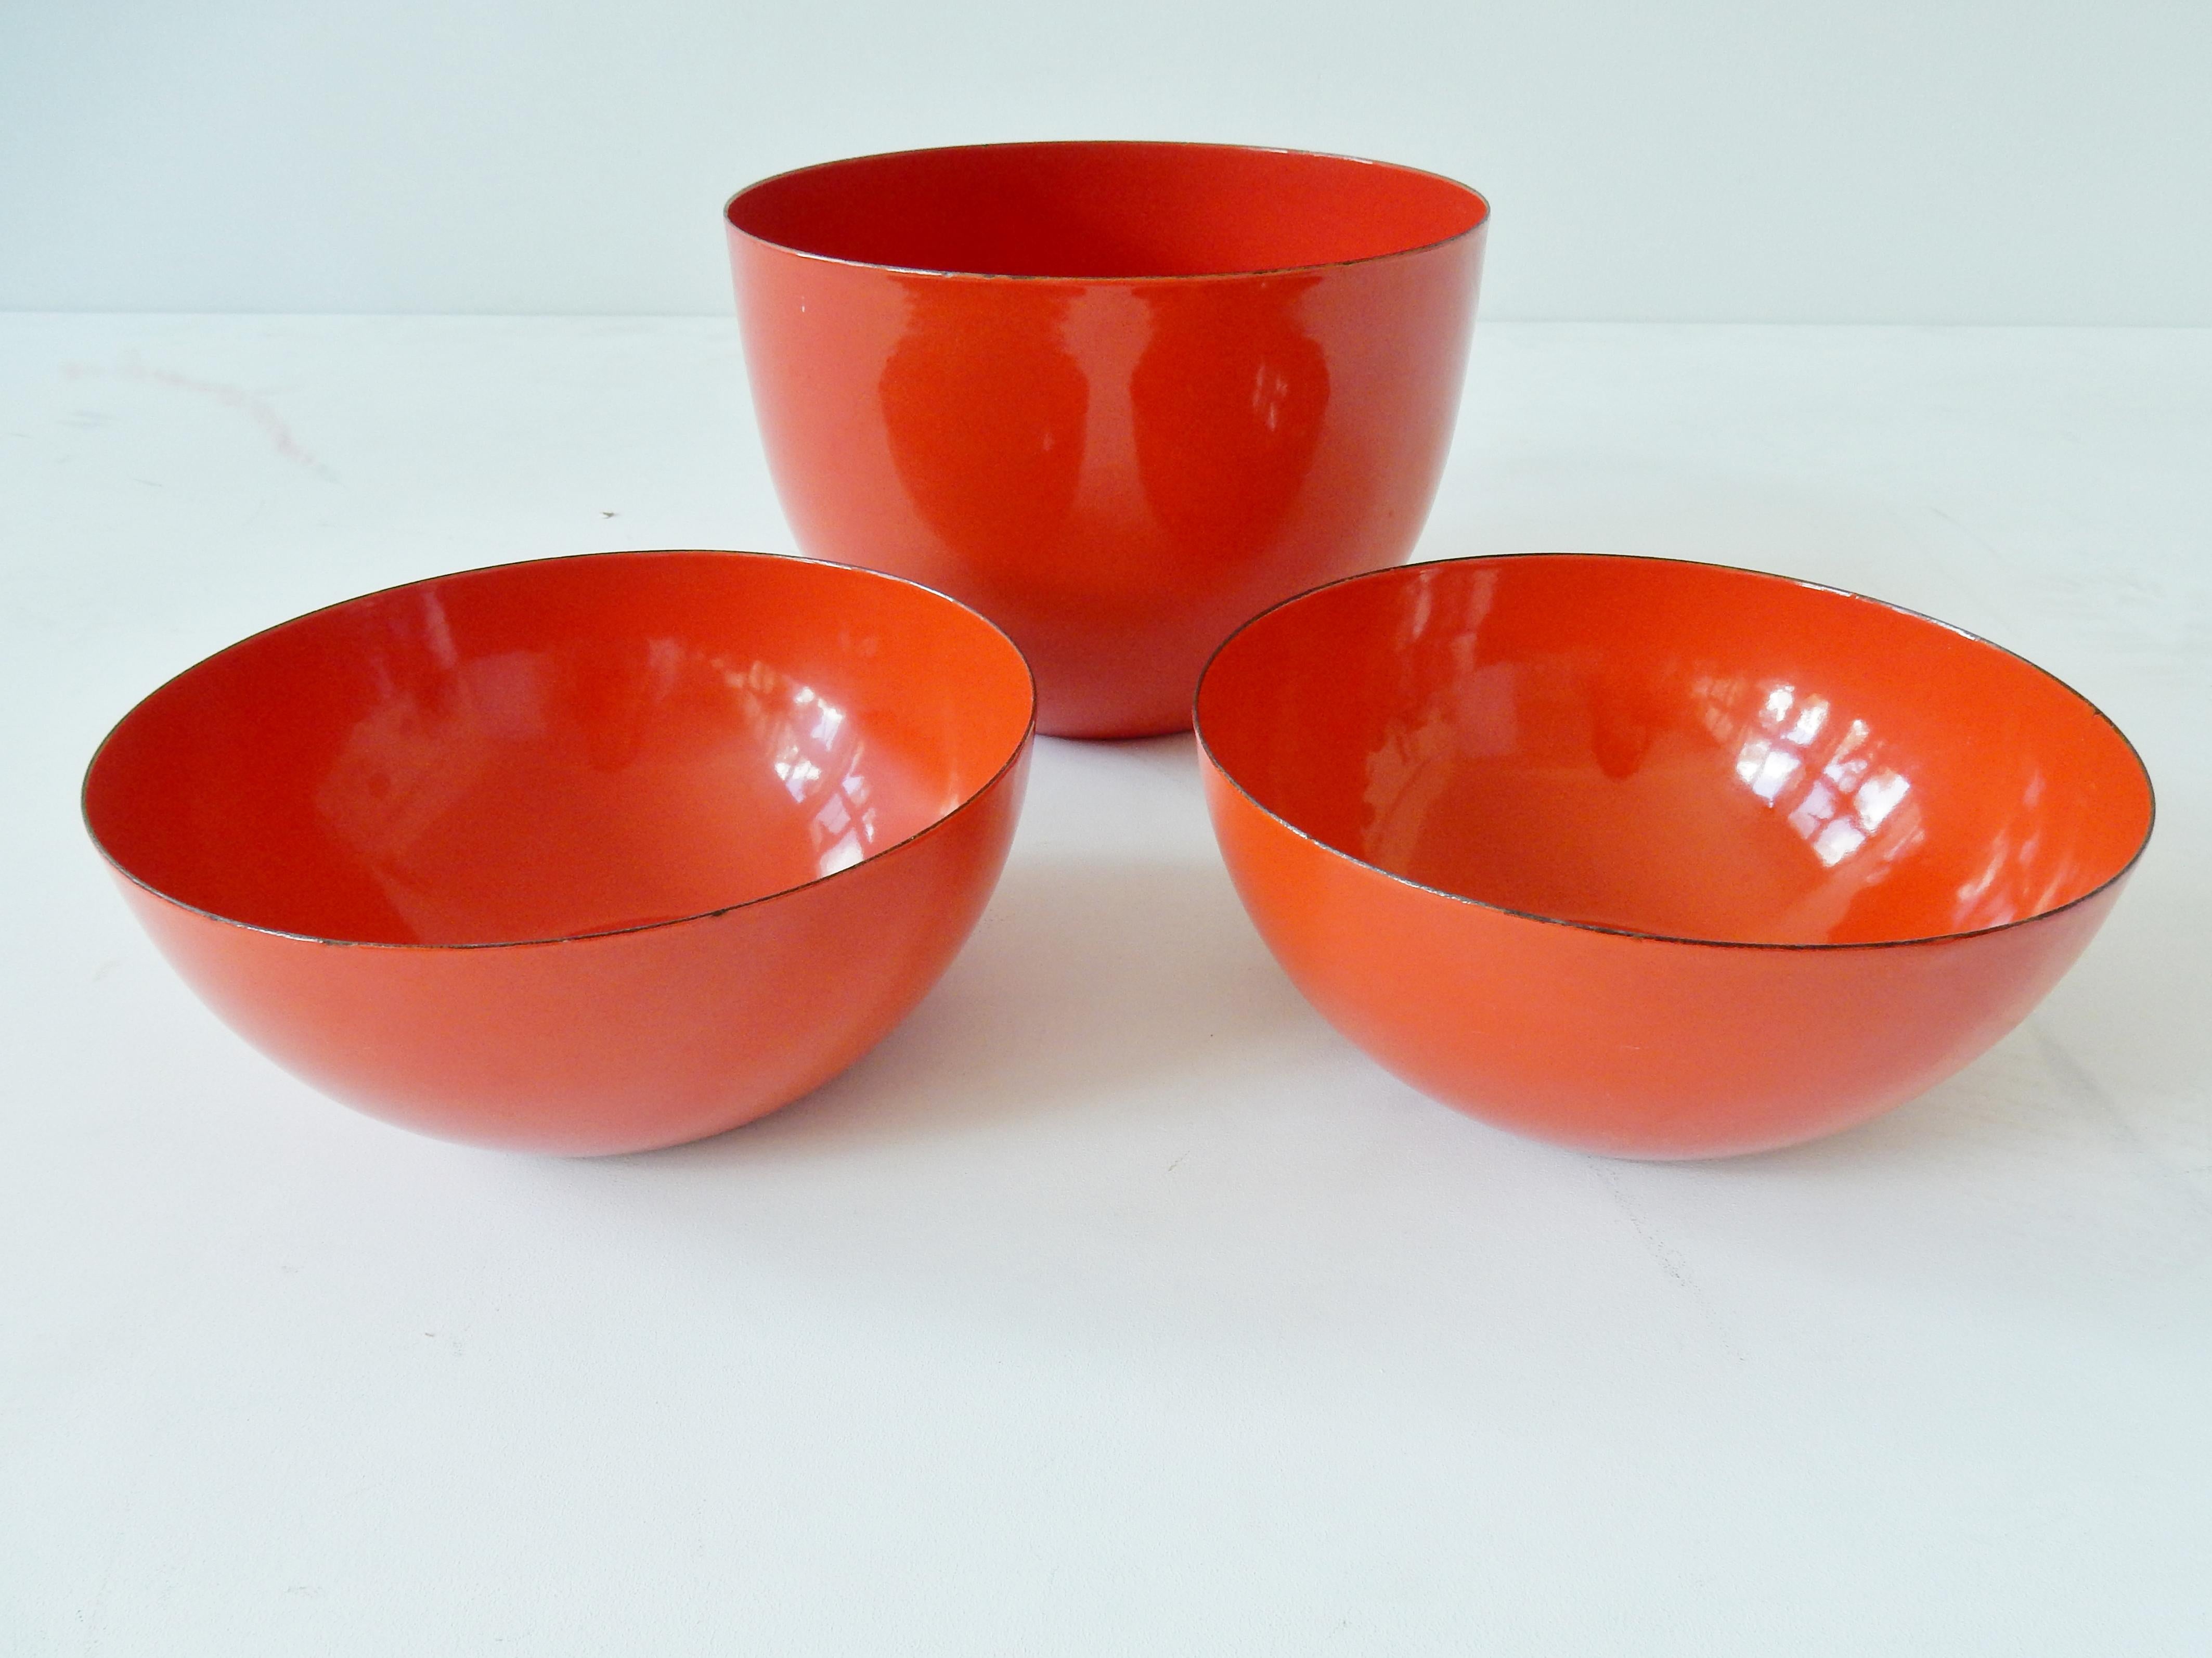 A very nice set of three red-orange enameled bowls made by Kaj Franck for Finel, made in Finland in the 1960s. These bowls are in a very good condition with some signs of age and use. The bowls are signed on the bottom.

Measurements:
Big bowl: Ø